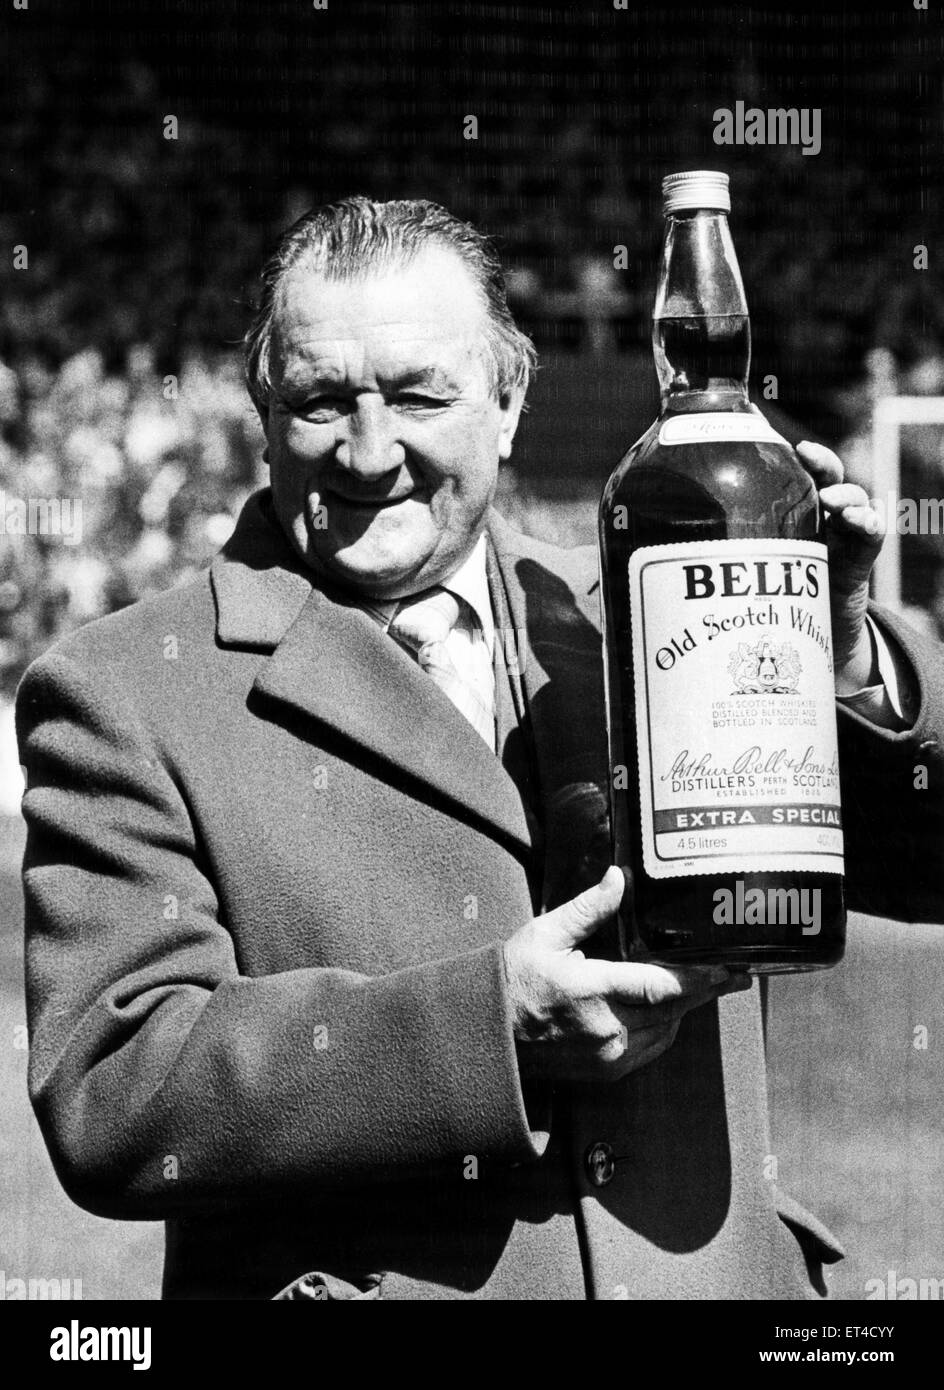 Liverpool manager Bob Paisley is awarded the Bells Scotch Whisky manager of the Month Award before his side's 2-0 win over Nottingham Forest at Anfield. 1st May 1982. Stock Photo